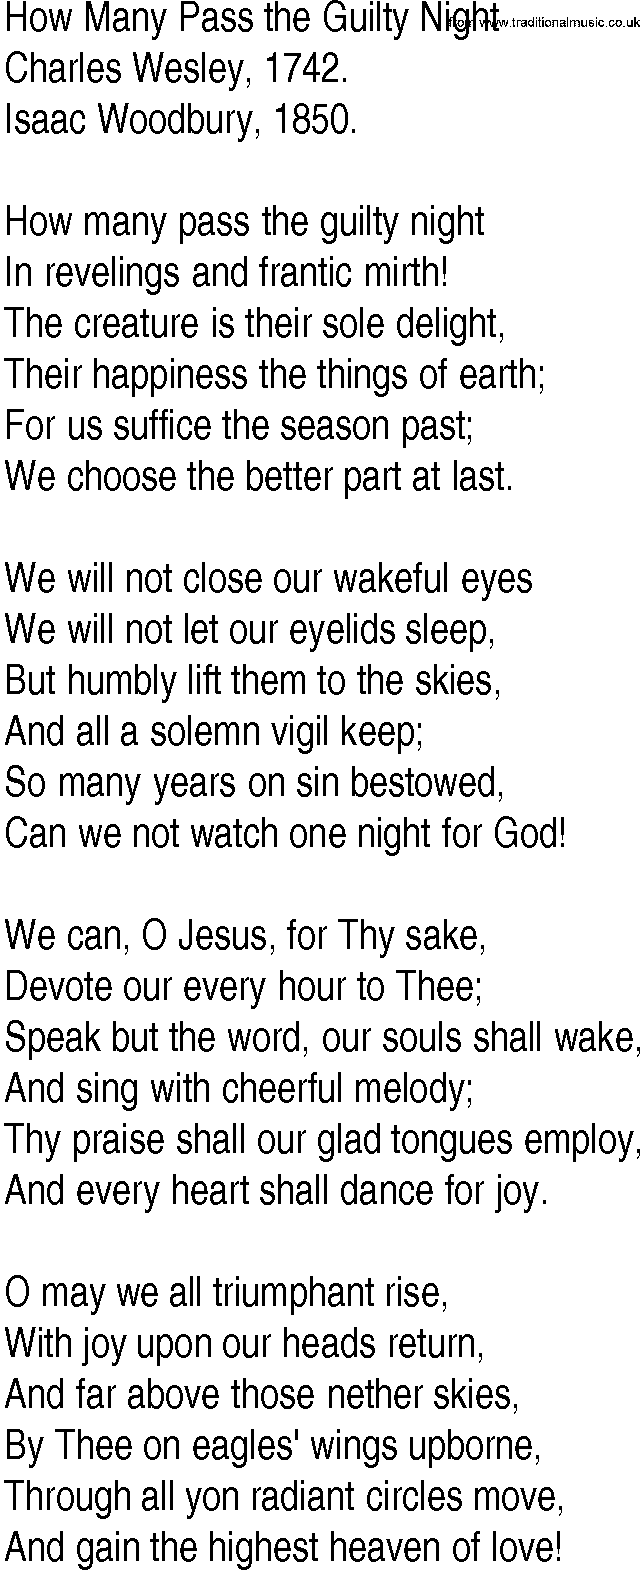 Hymn and Gospel Song: How Many Pass the Guilty Night by Charles Wesley lyrics